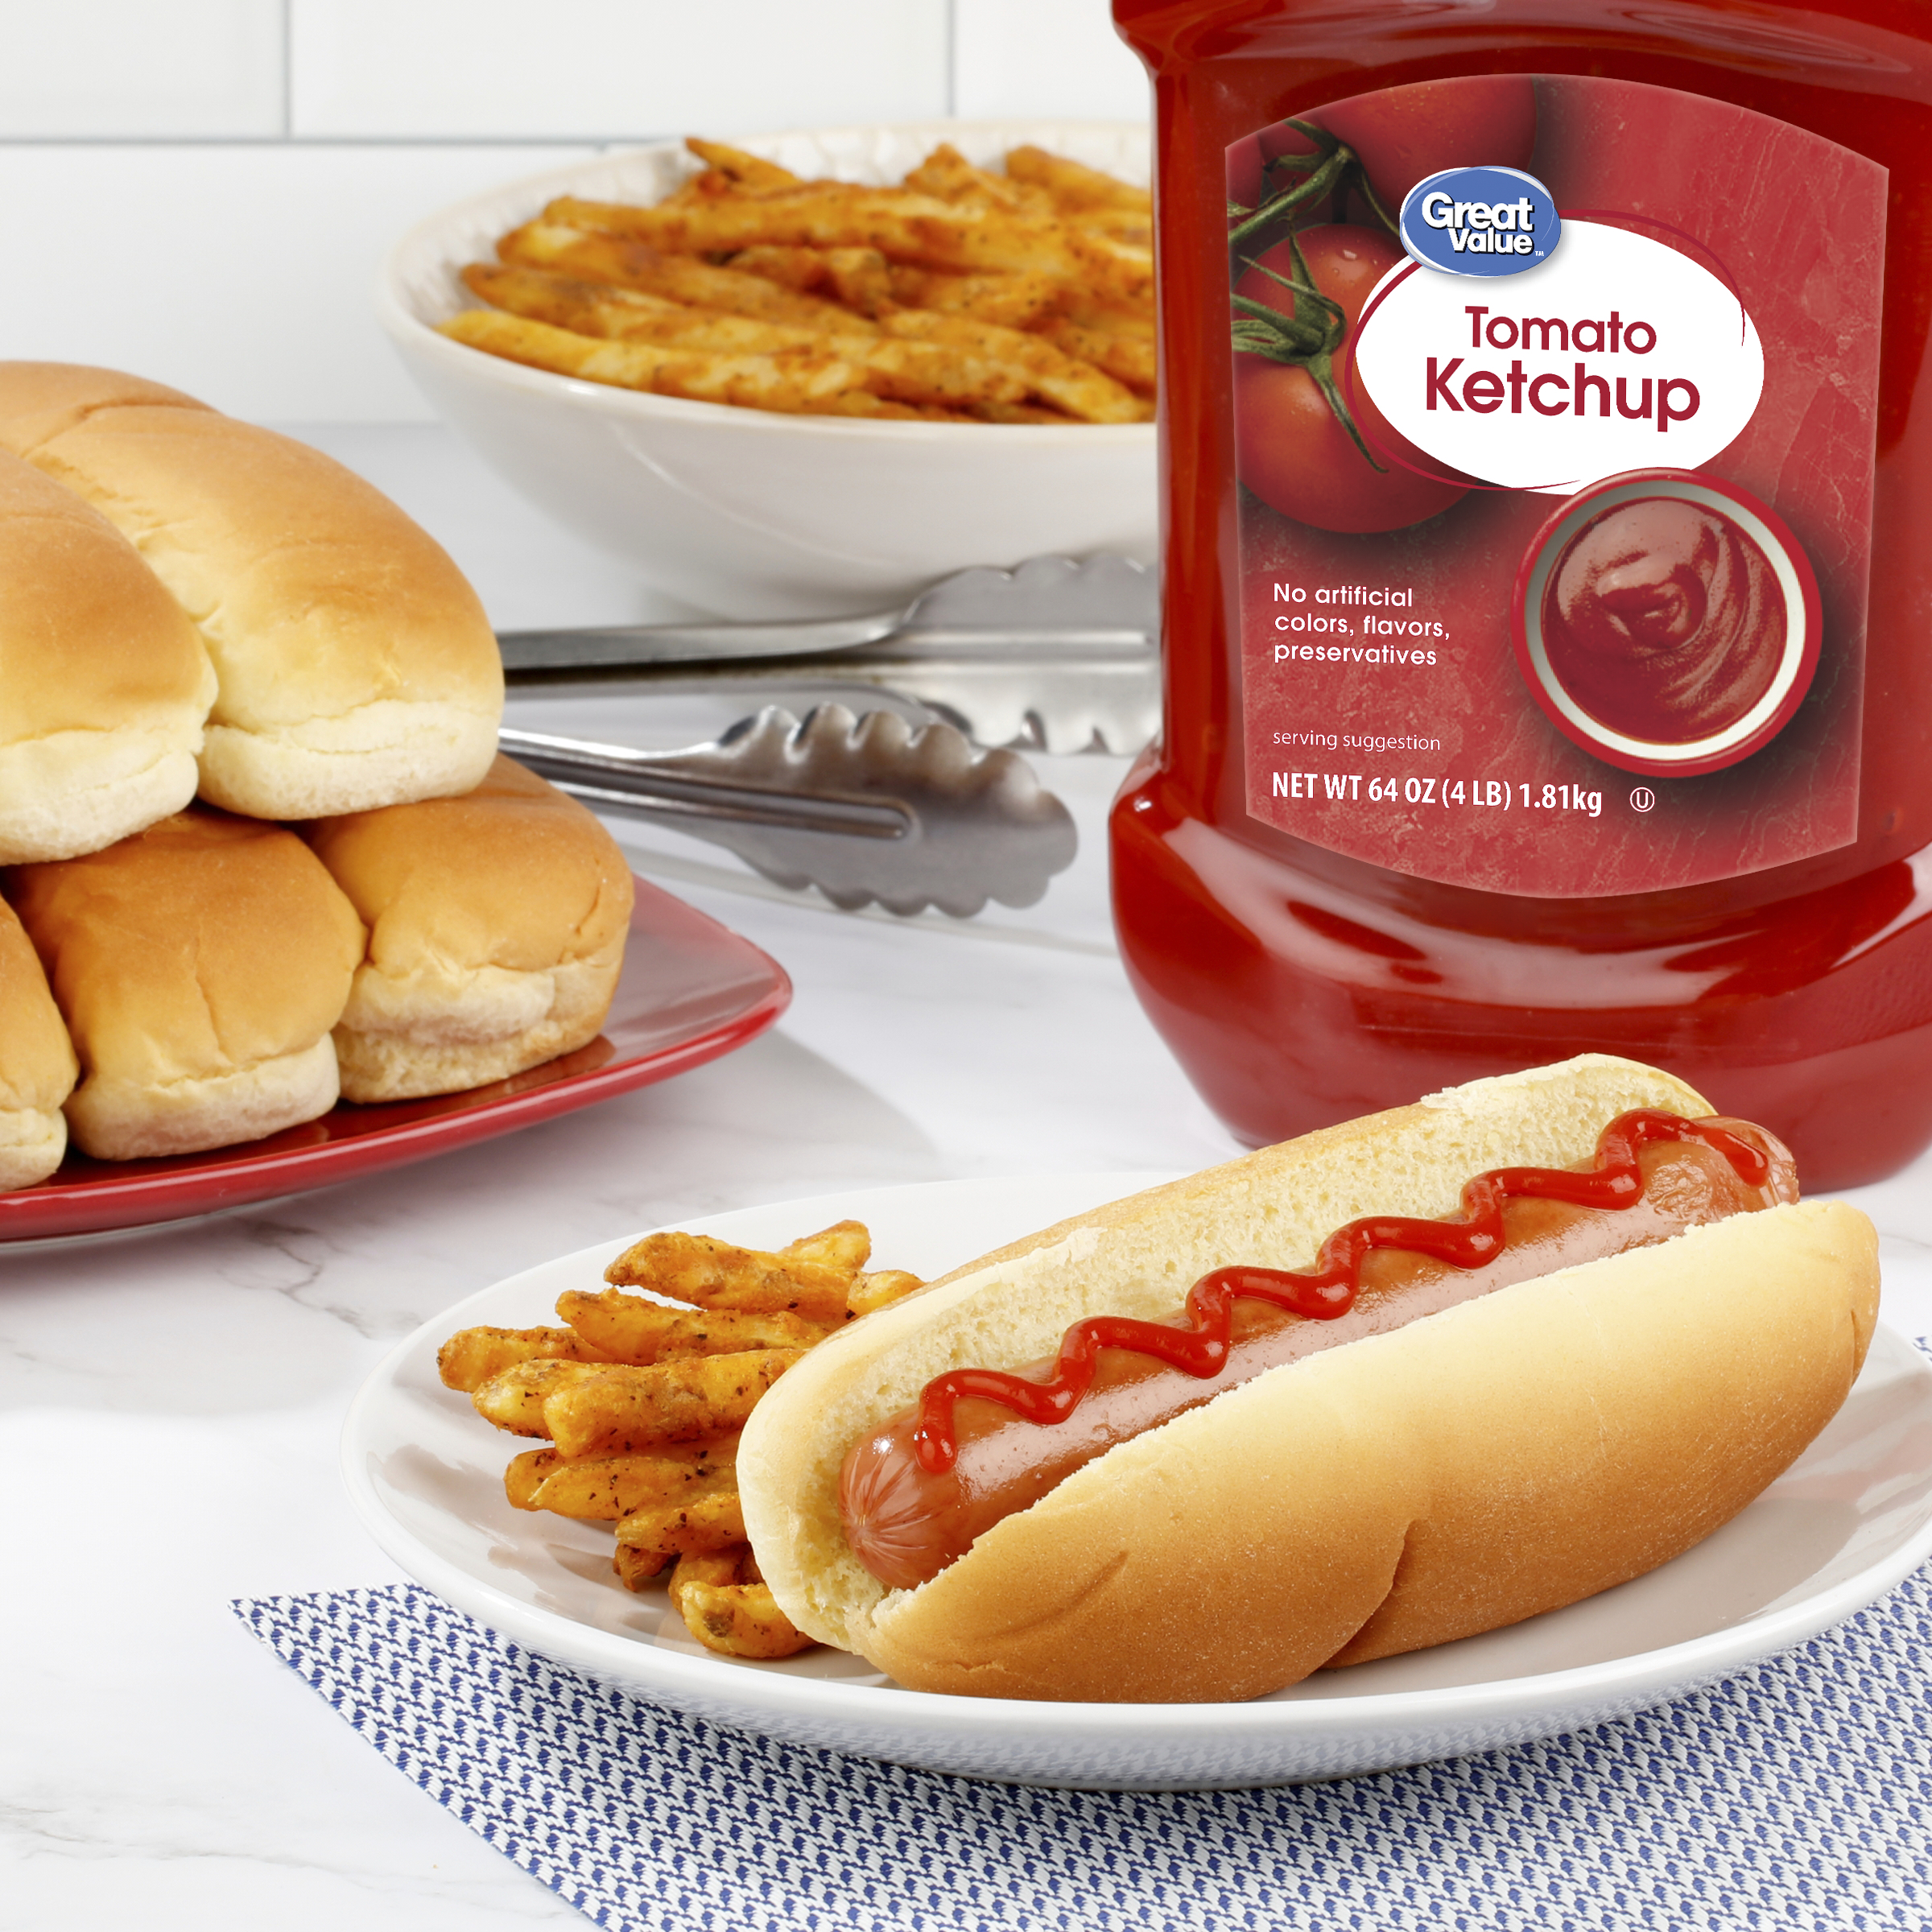 Great Value Tomato Ketchup, 64 oz - image 2 of 7